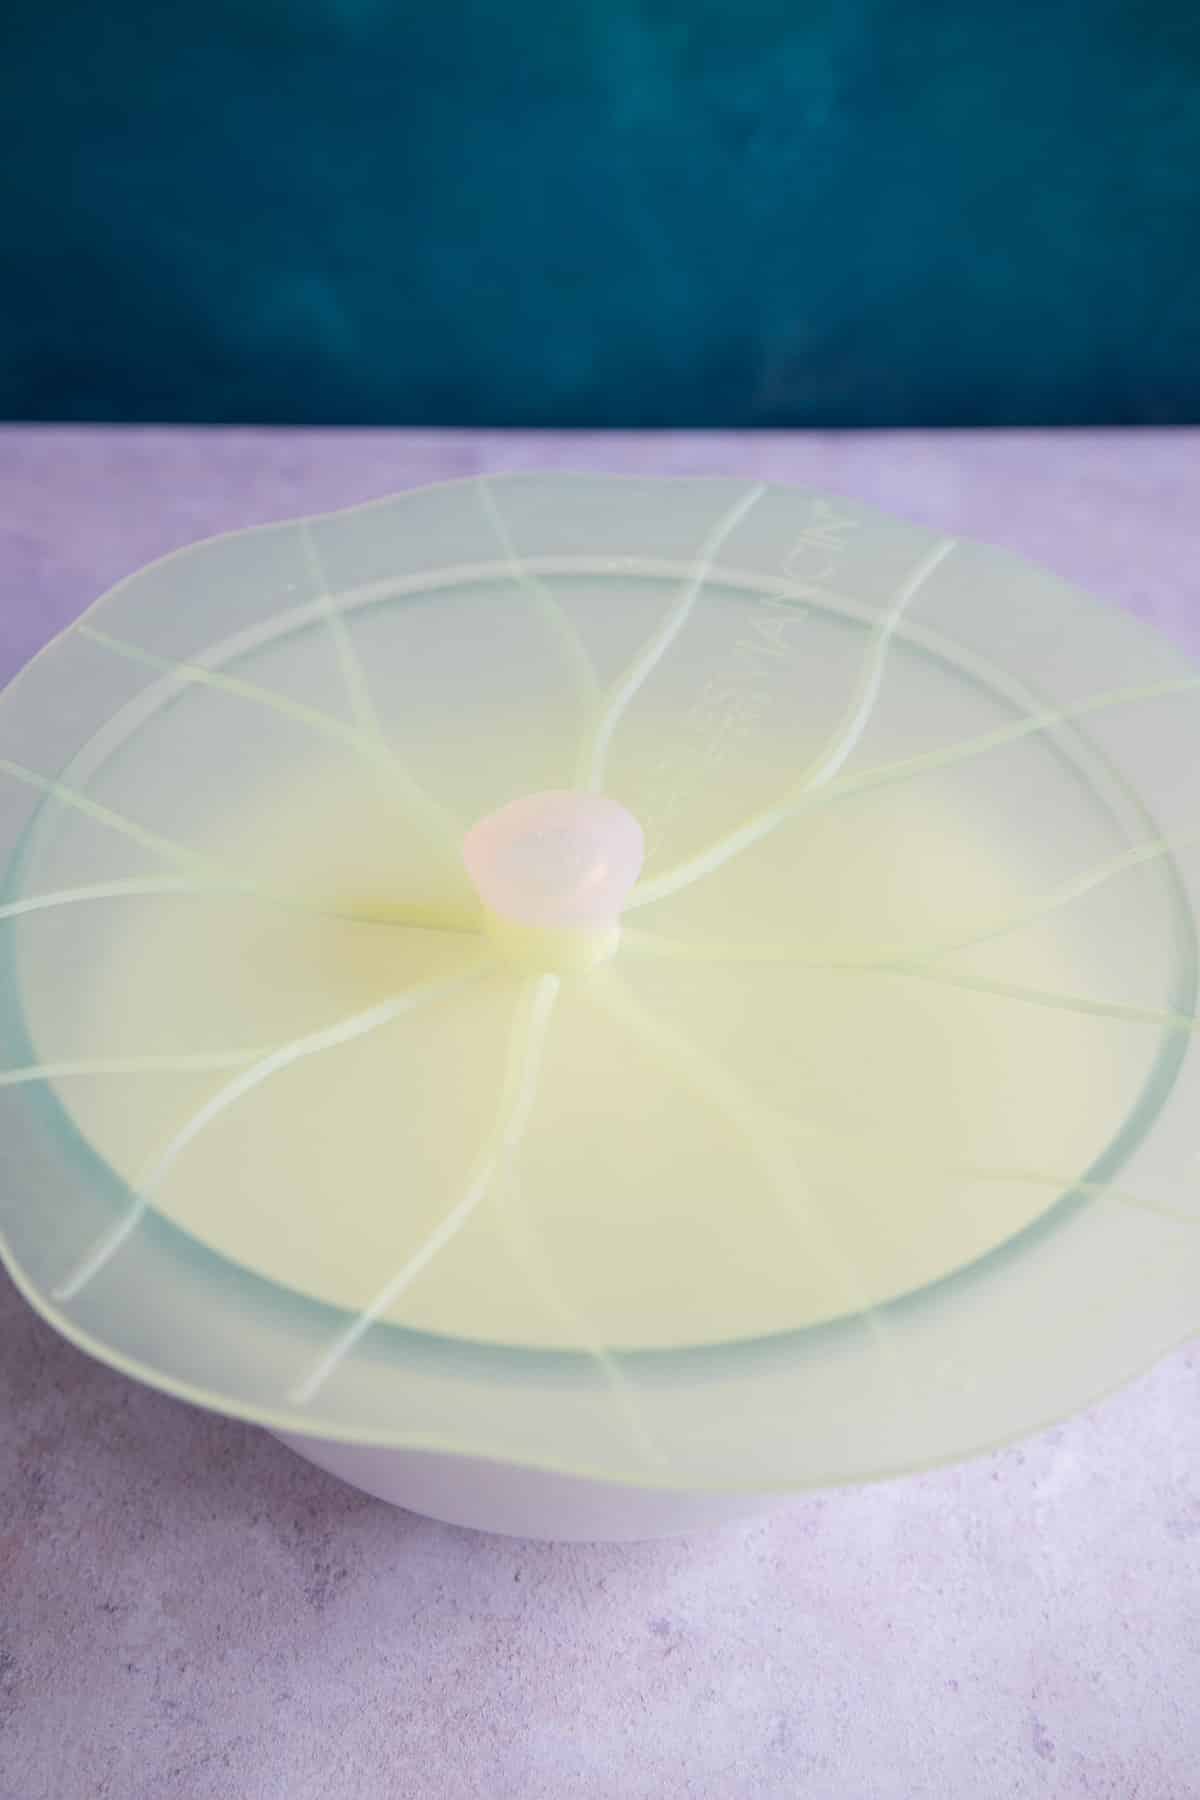 A bowl of kefir grains and milk, covered with a silicone cover.